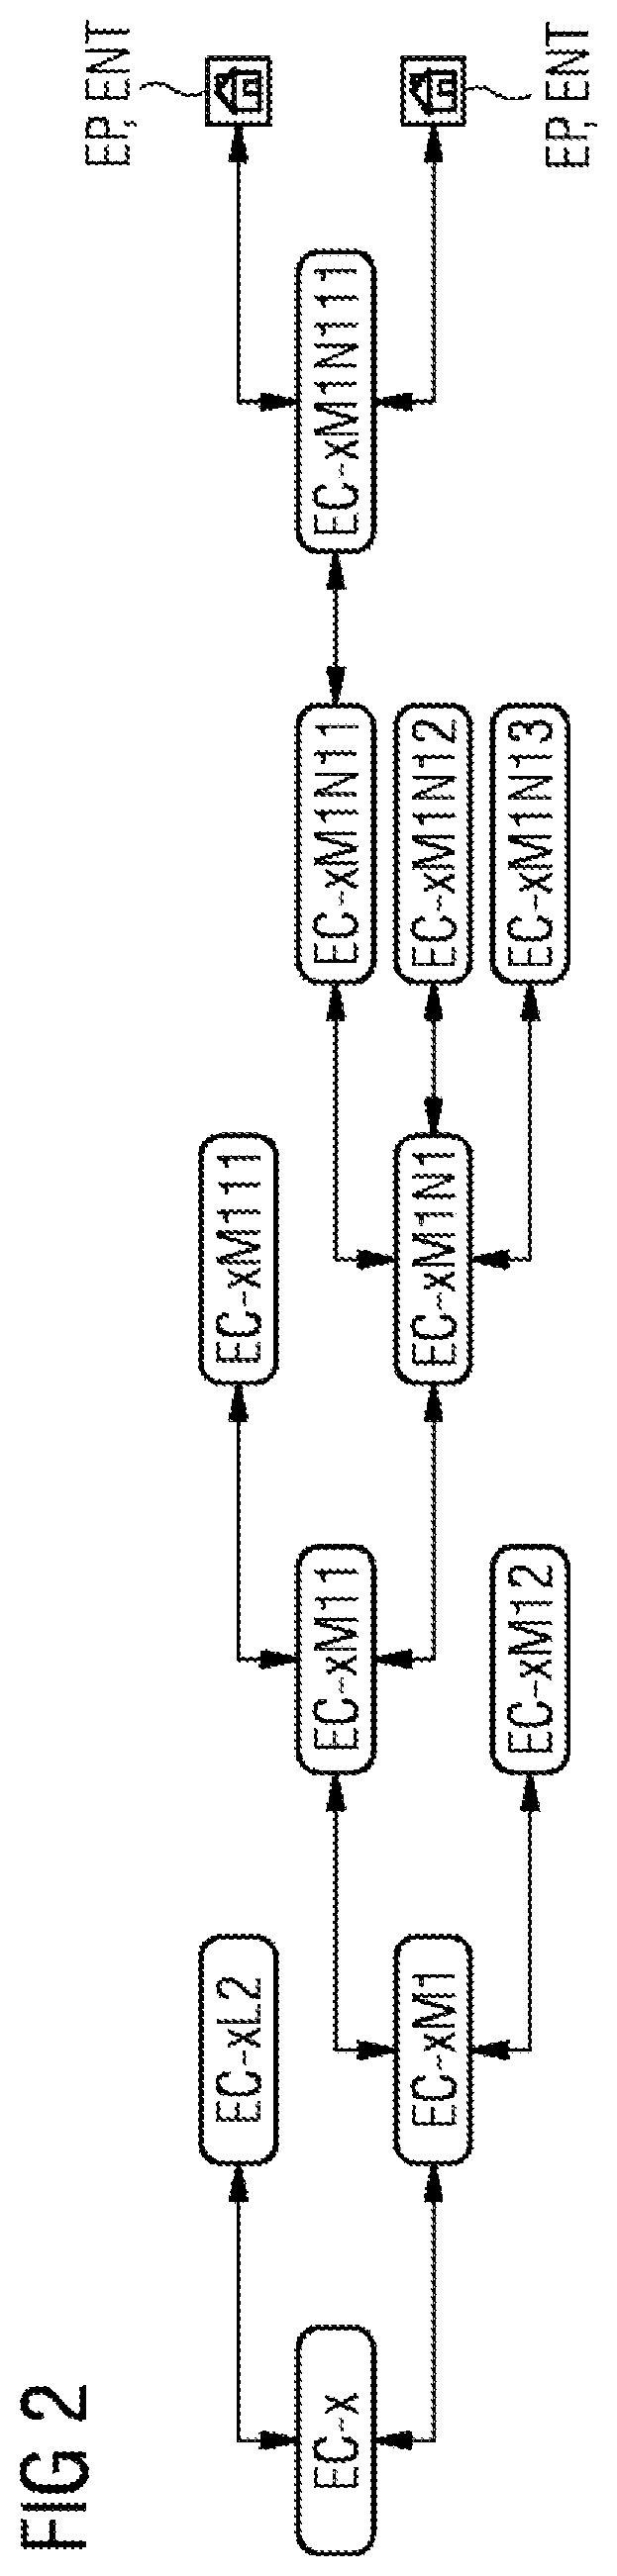 Method, computer program product, device, and energy cluster service system for managing control targets, in particular load balancing processes, when controlling the supply, conversion, storage, infeed, distribution, and/or use of energy in an energy network